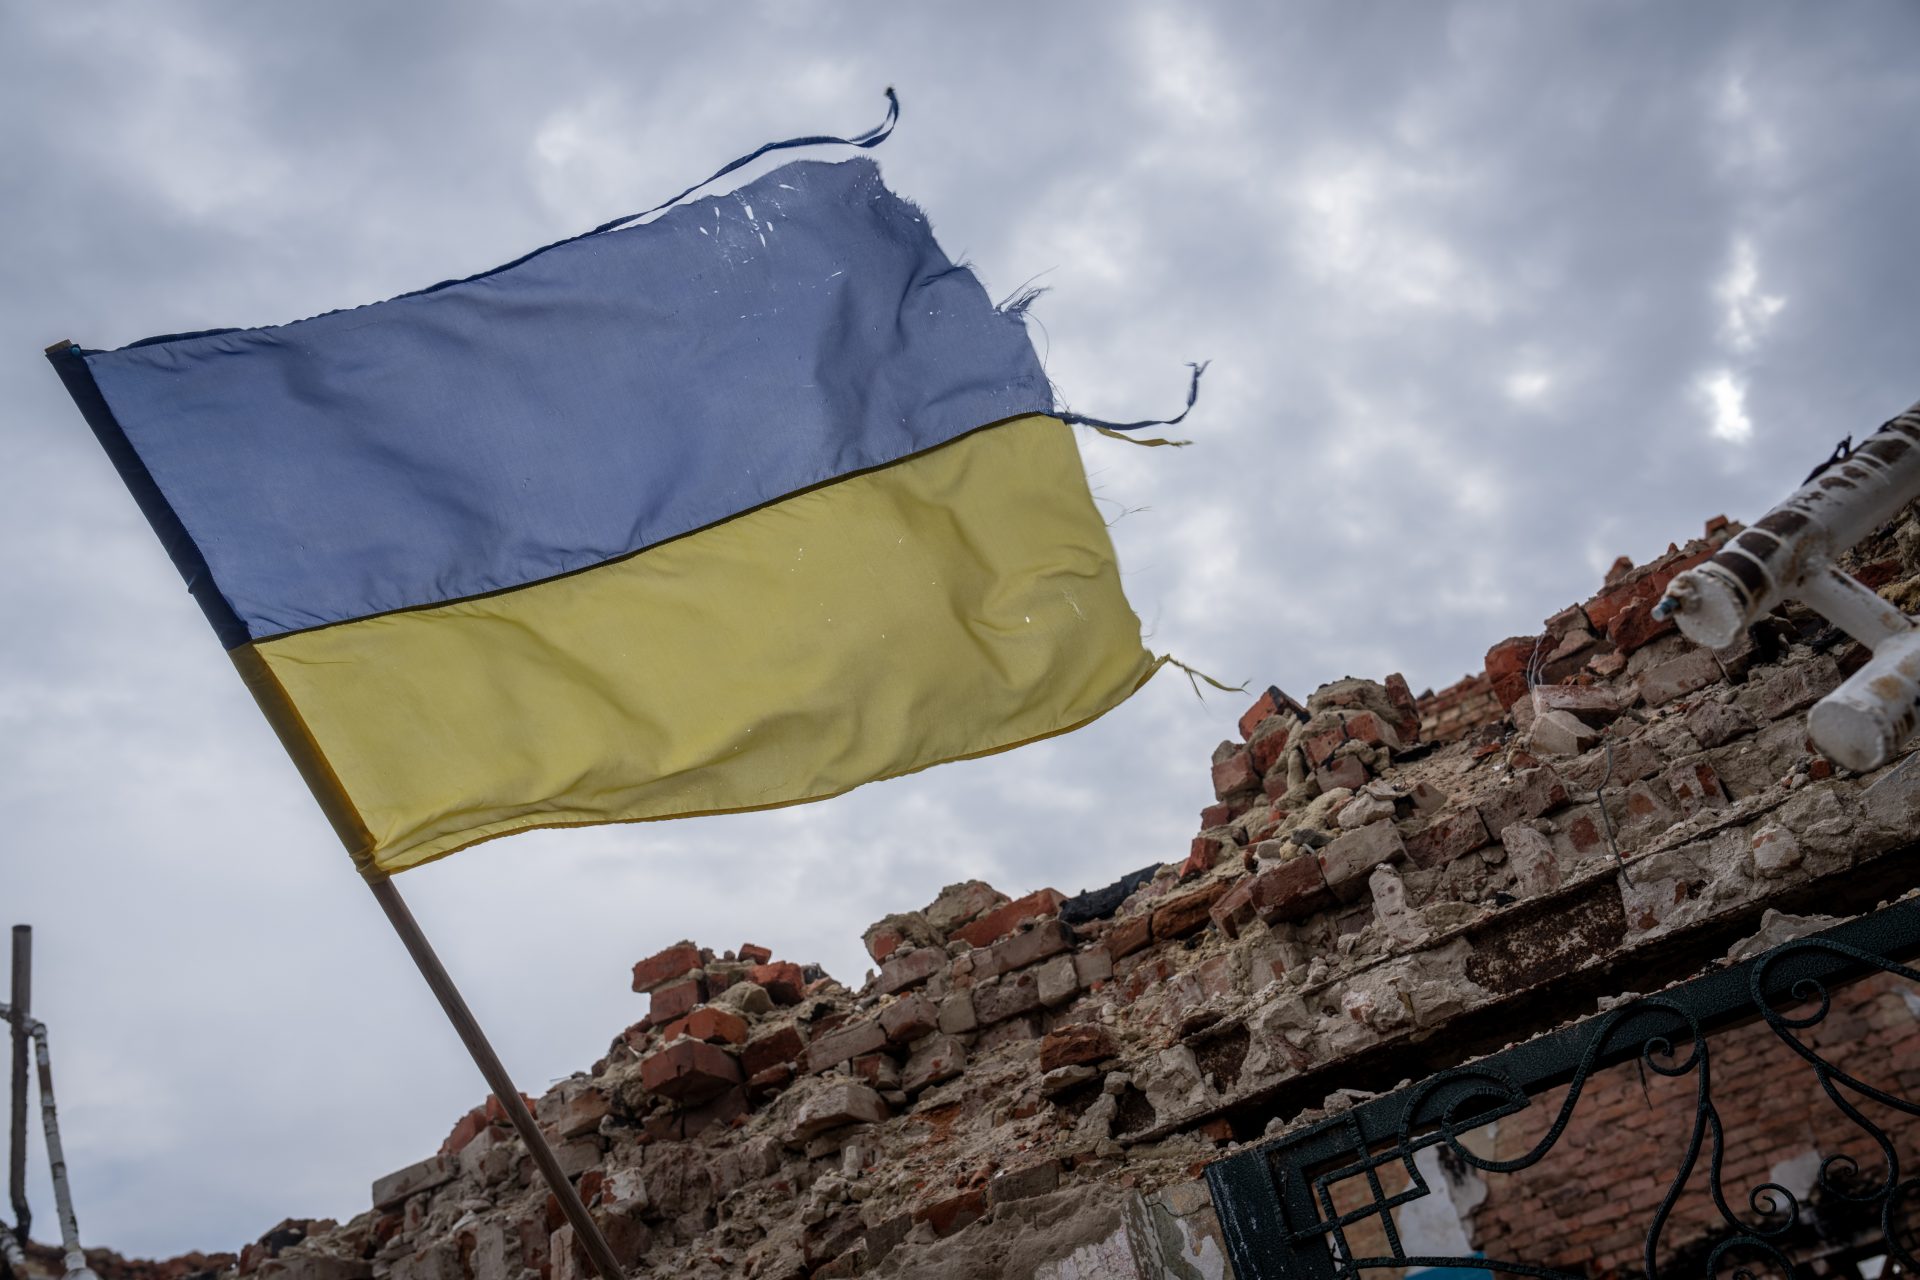 <p><span>The report noted no commandos were lost in the encounter and added that the soldiers left a Ukrainian flag flying on the occupied peninsula before they departed and returned to friendly territory. </span></p>